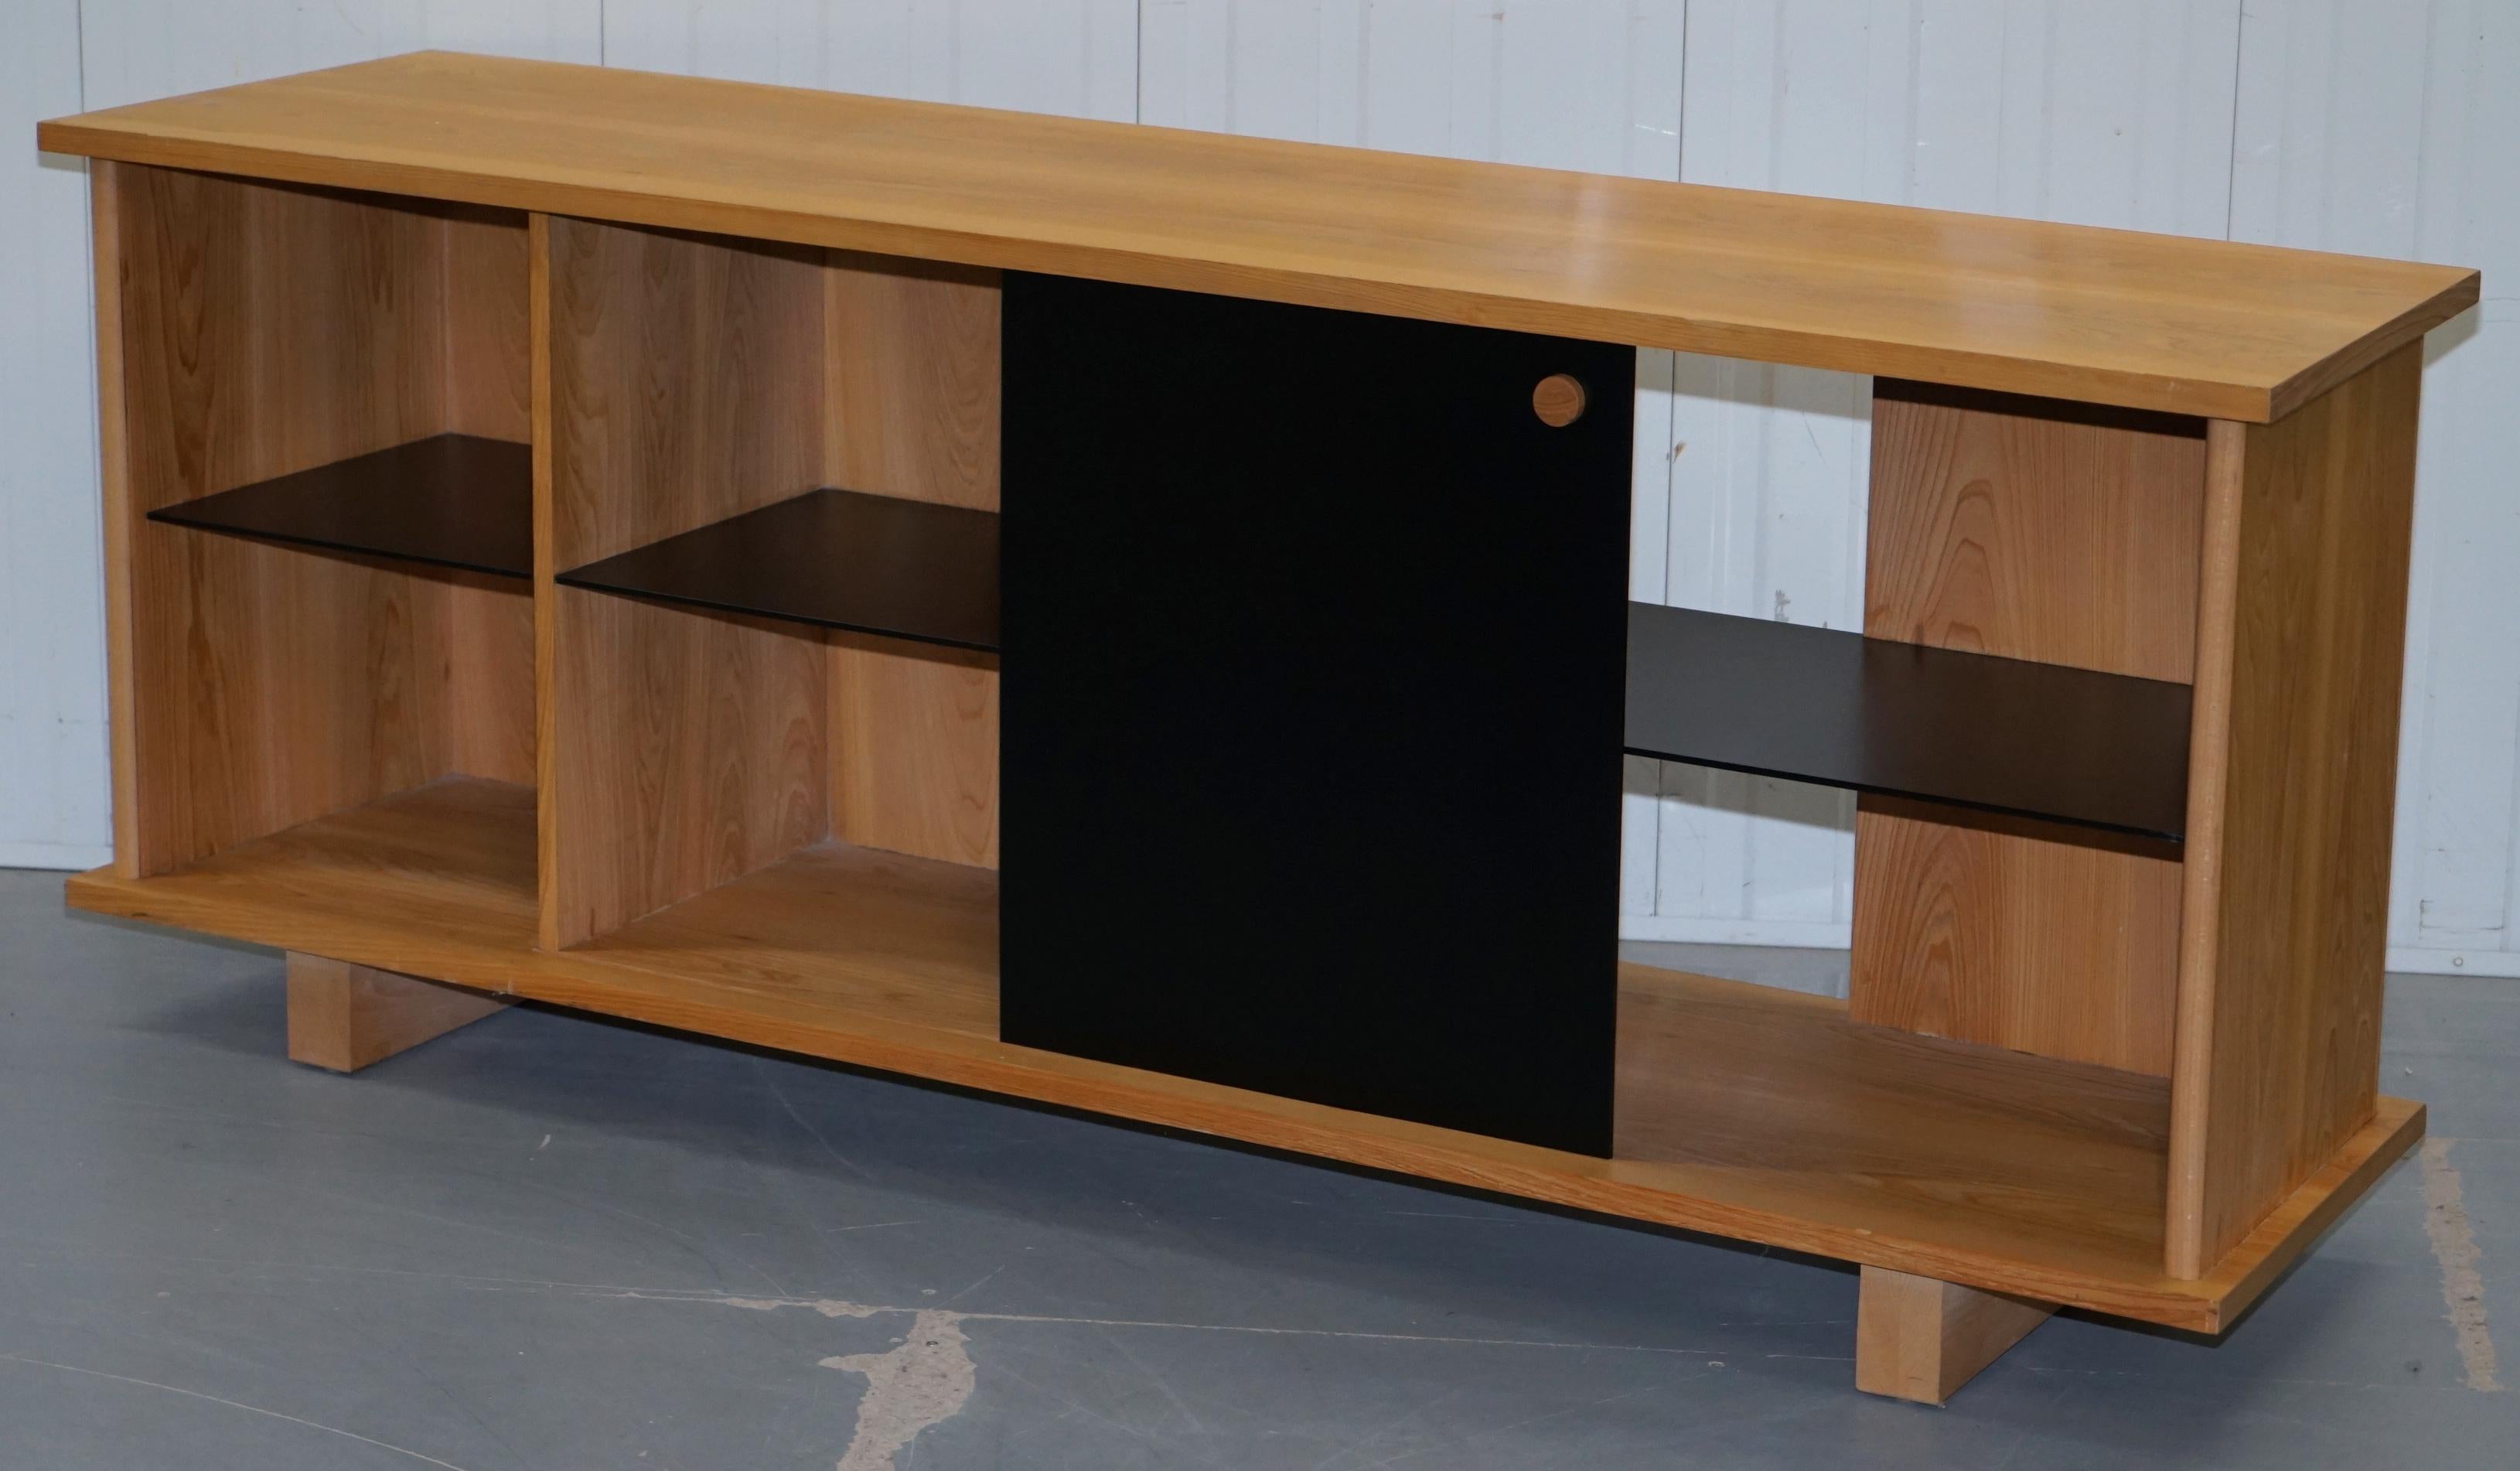 We are delighted to offer for sale this ex showroom stock Ralph Lauren RRP £14,000 light Rosewood sideboard buffer with solid polished slate stone door and shelves

I have recently taken into stock around 12 brand new showroom pieces from Ralph